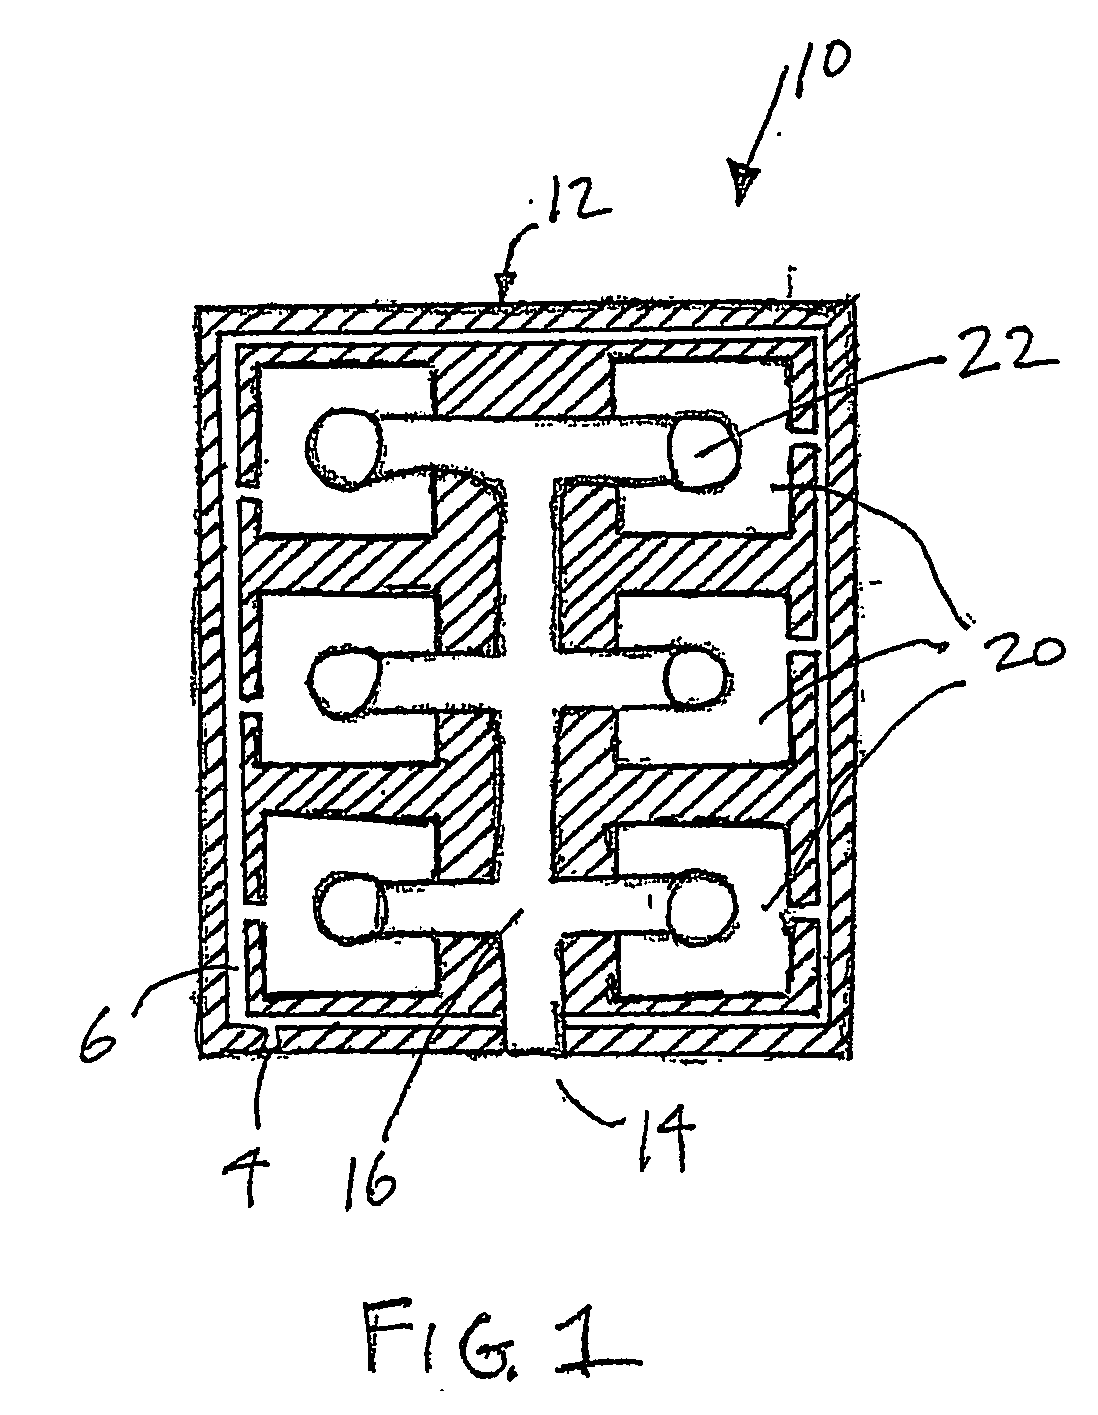 Configurable Microfluidic Substrate Assembly